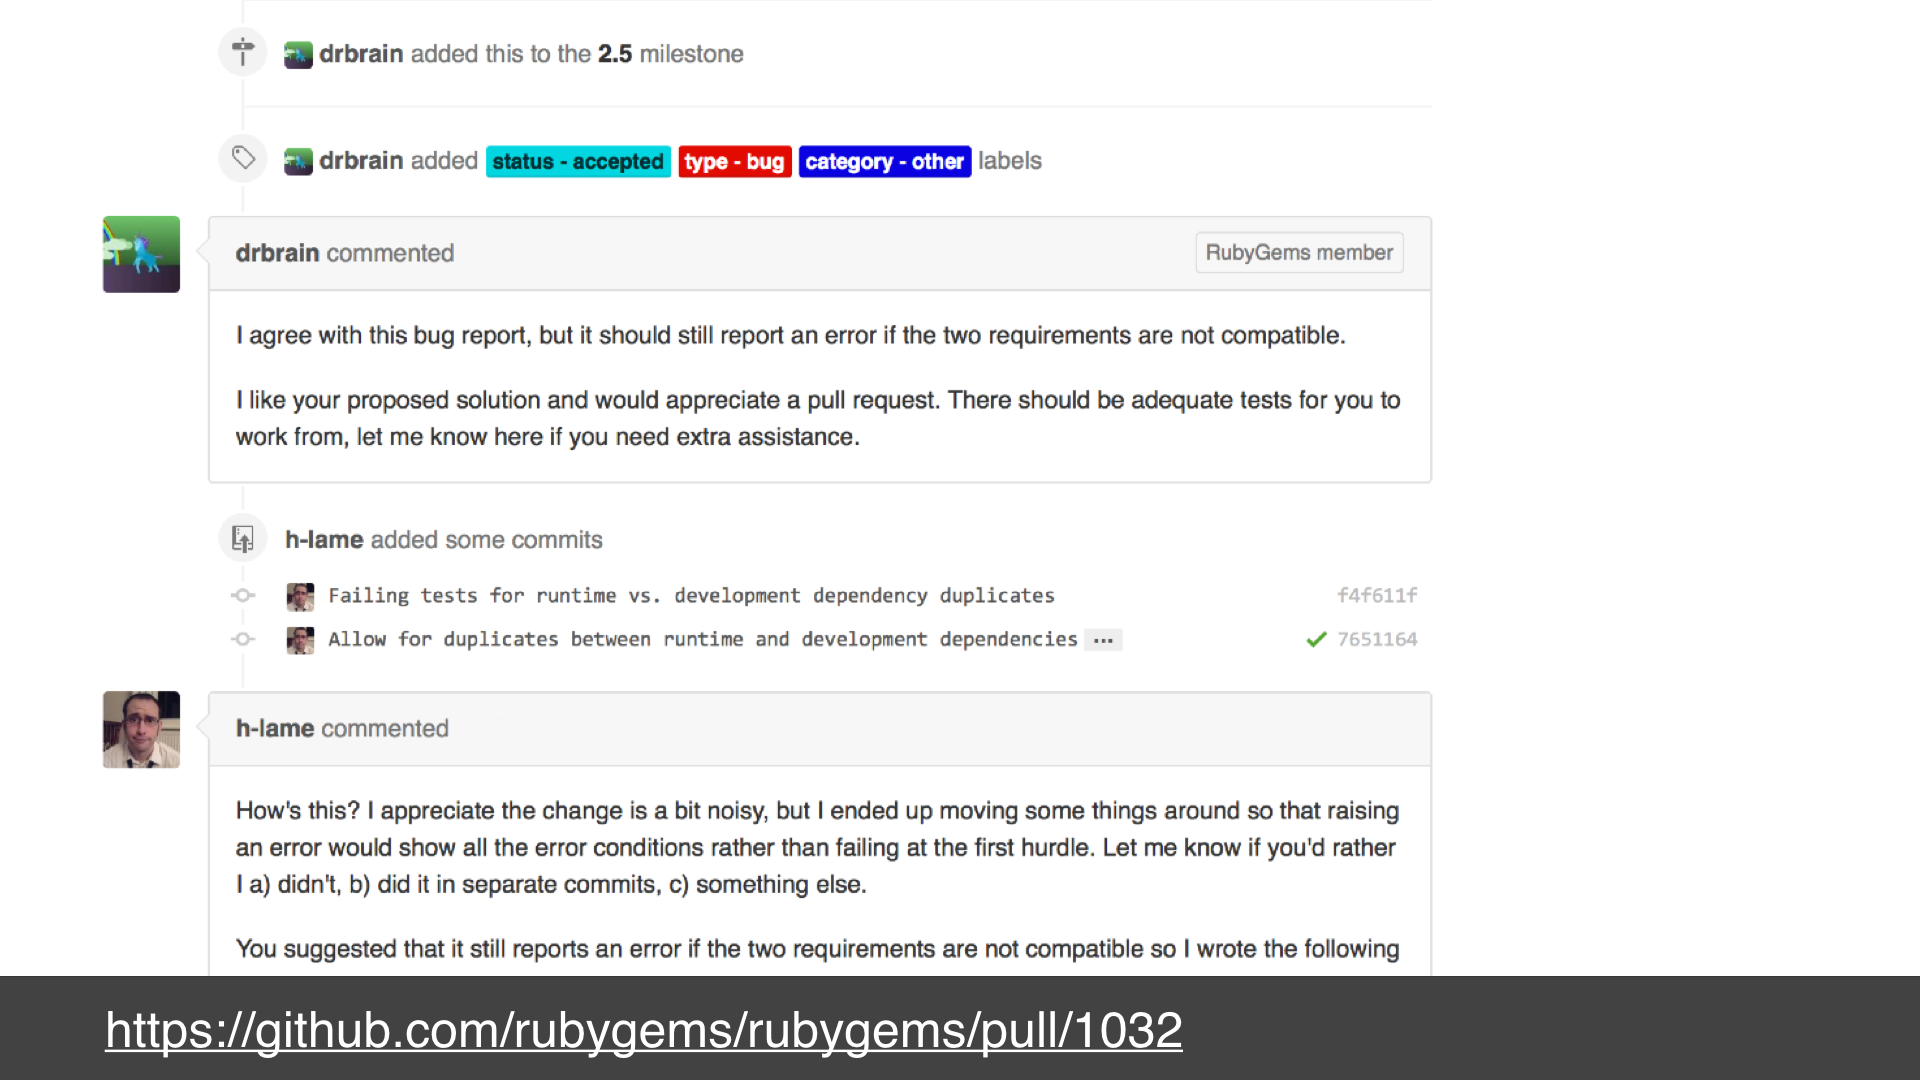 A screenshot of the issue I raised on github showing the response from the maintainers saying what Iʼd reported was a real bug and my subsequent commits with a proposed solution - text: https://github.com/rubygems/rubygems/pull/1032